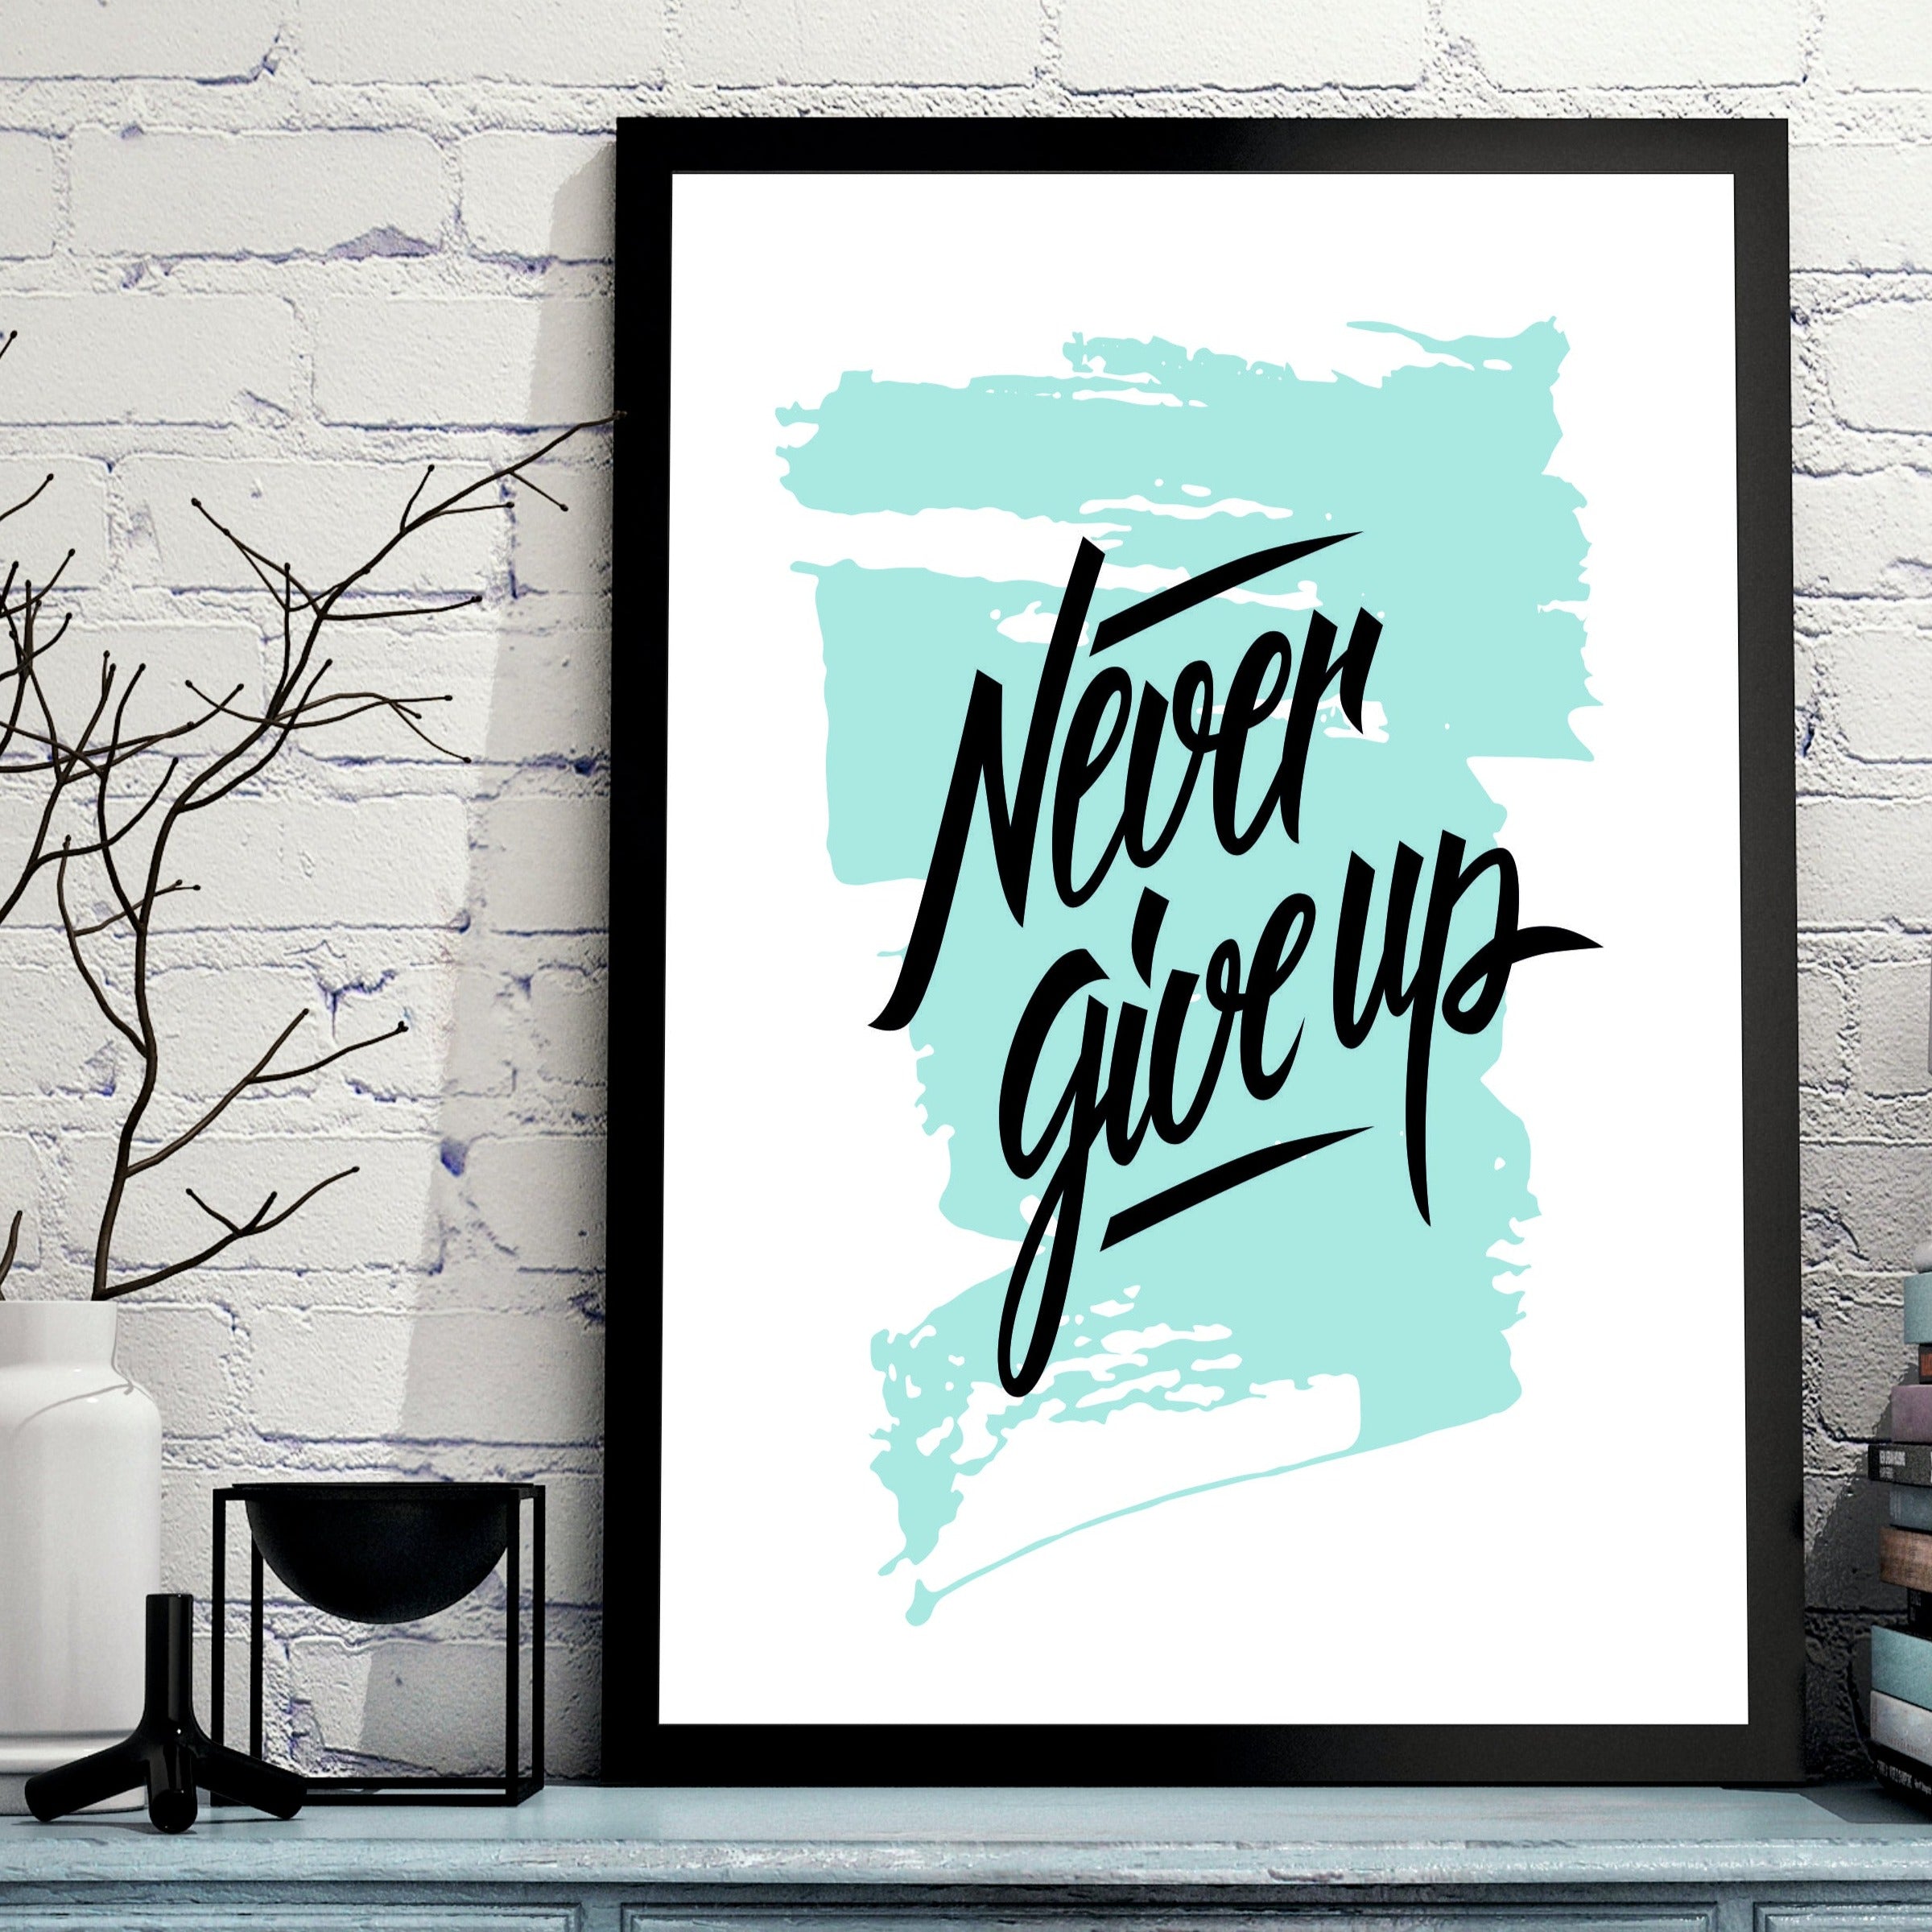 Never Give up - Poster Frame (Pack of 2 Pieces)